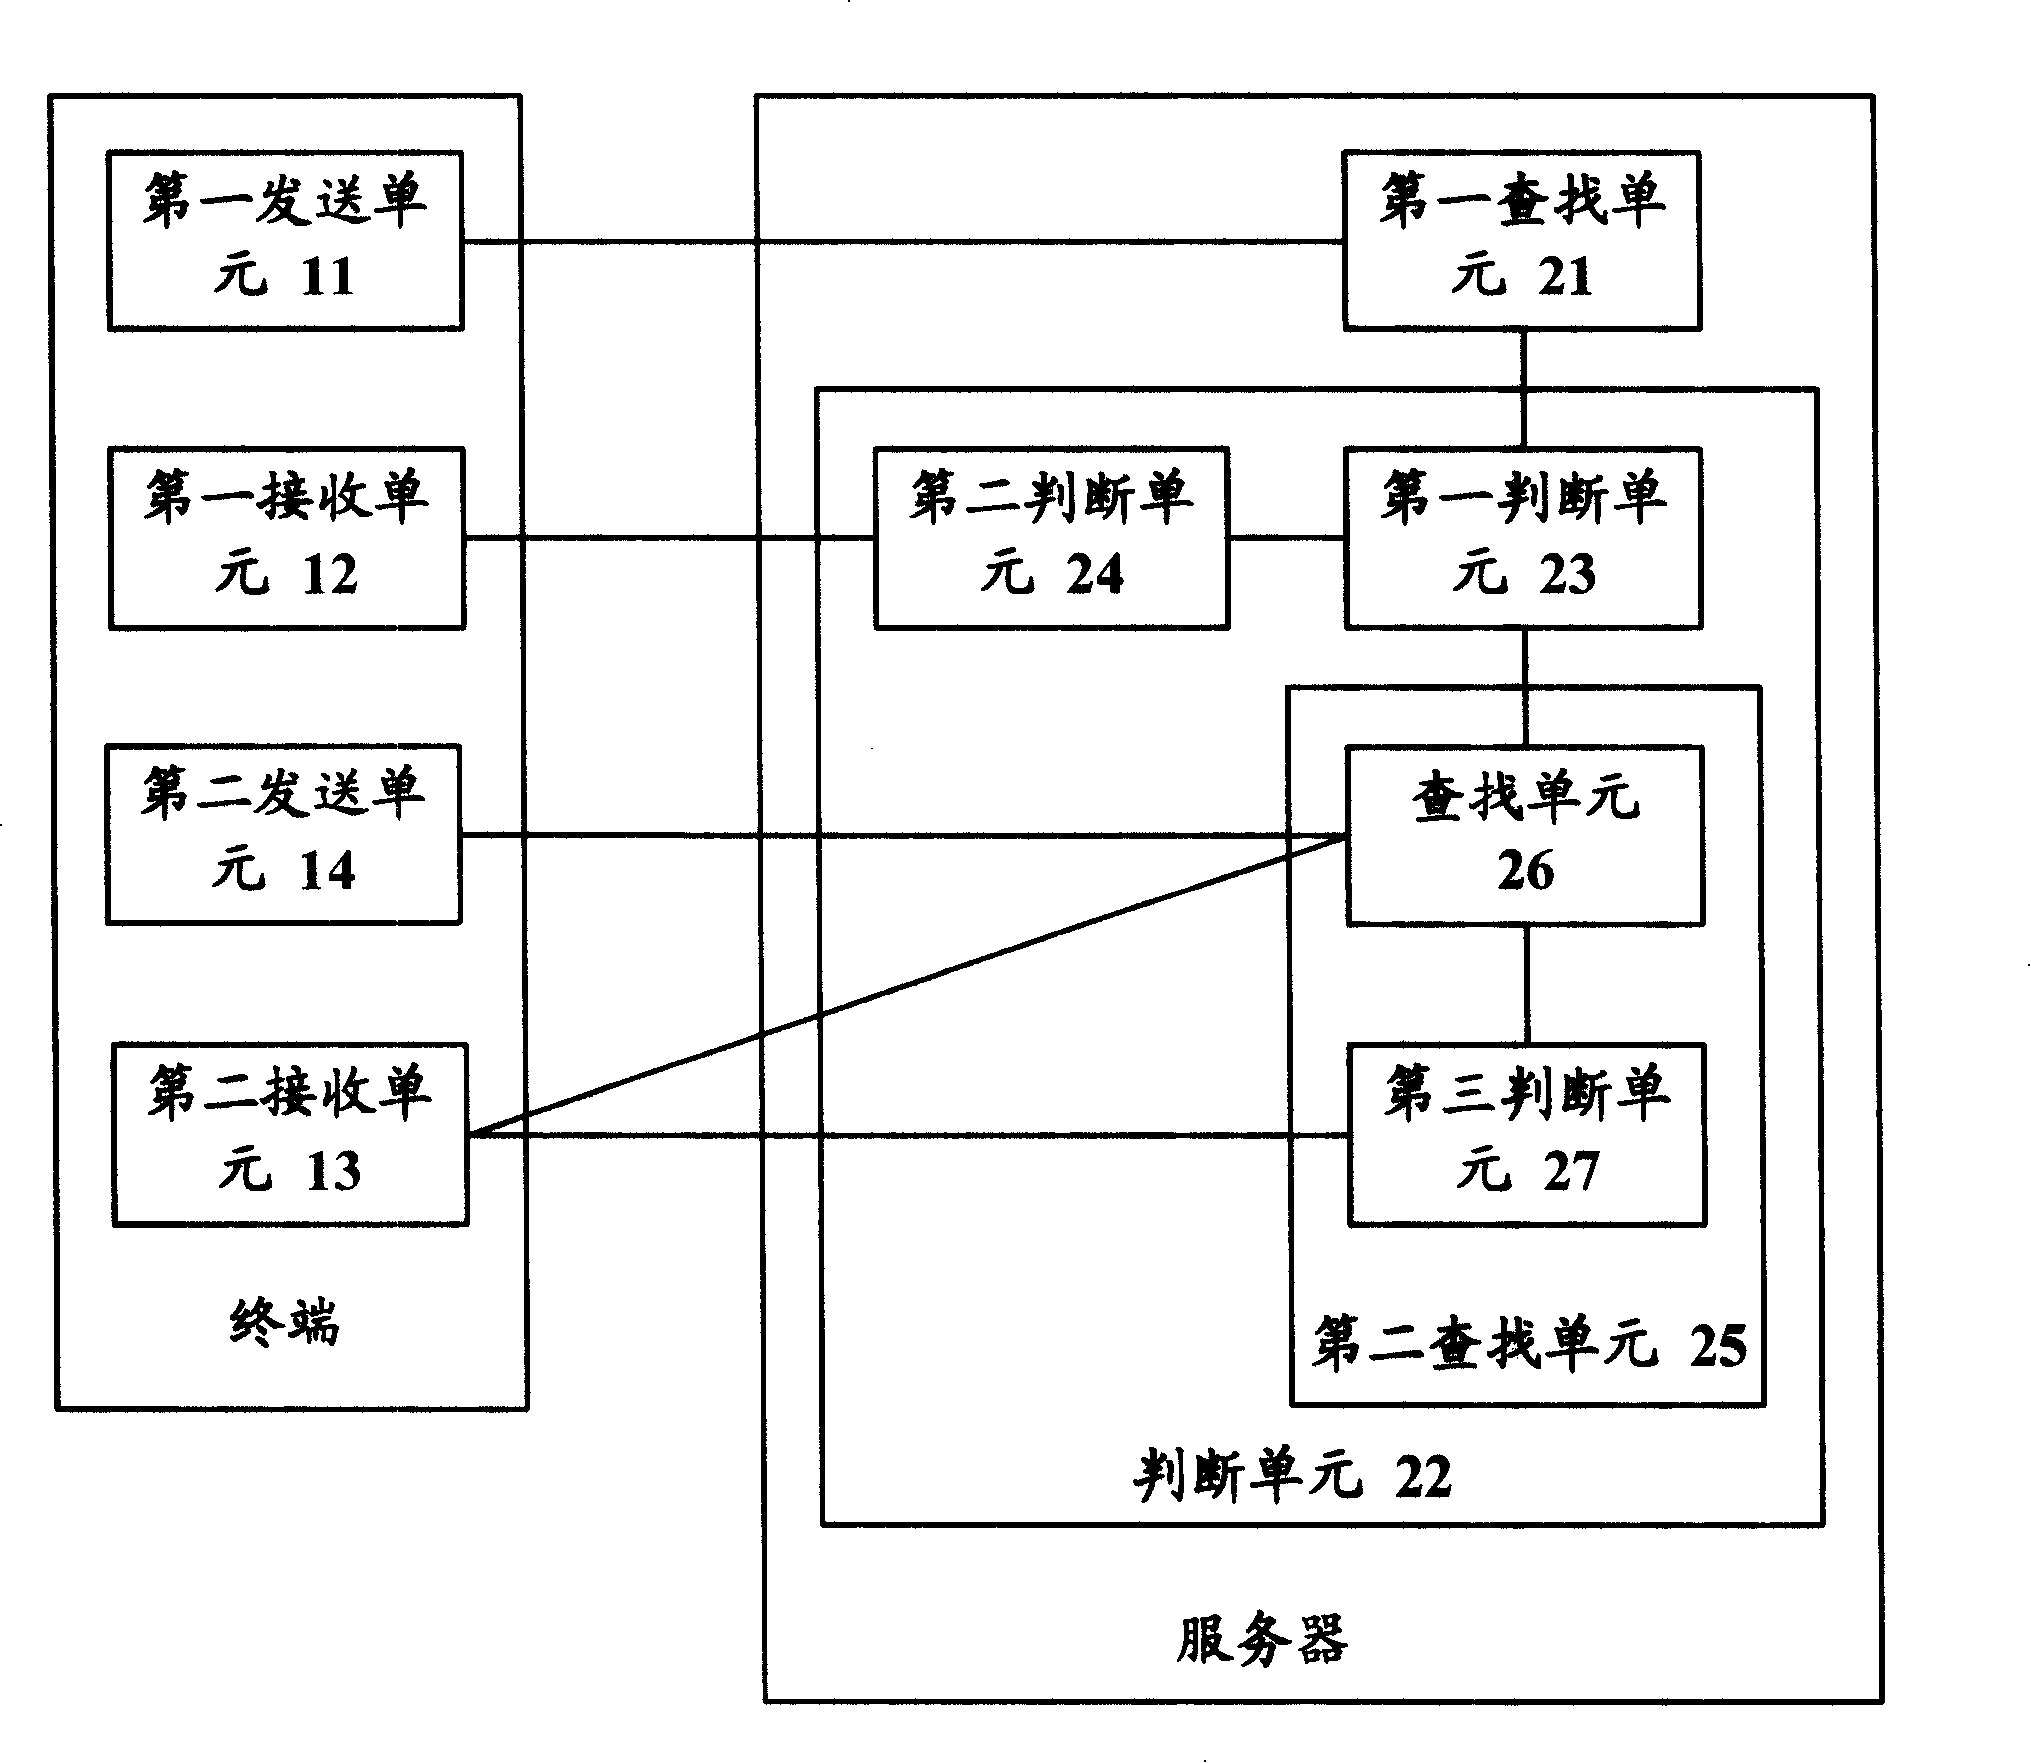 Method, system and apparatus for implementation of class heading search